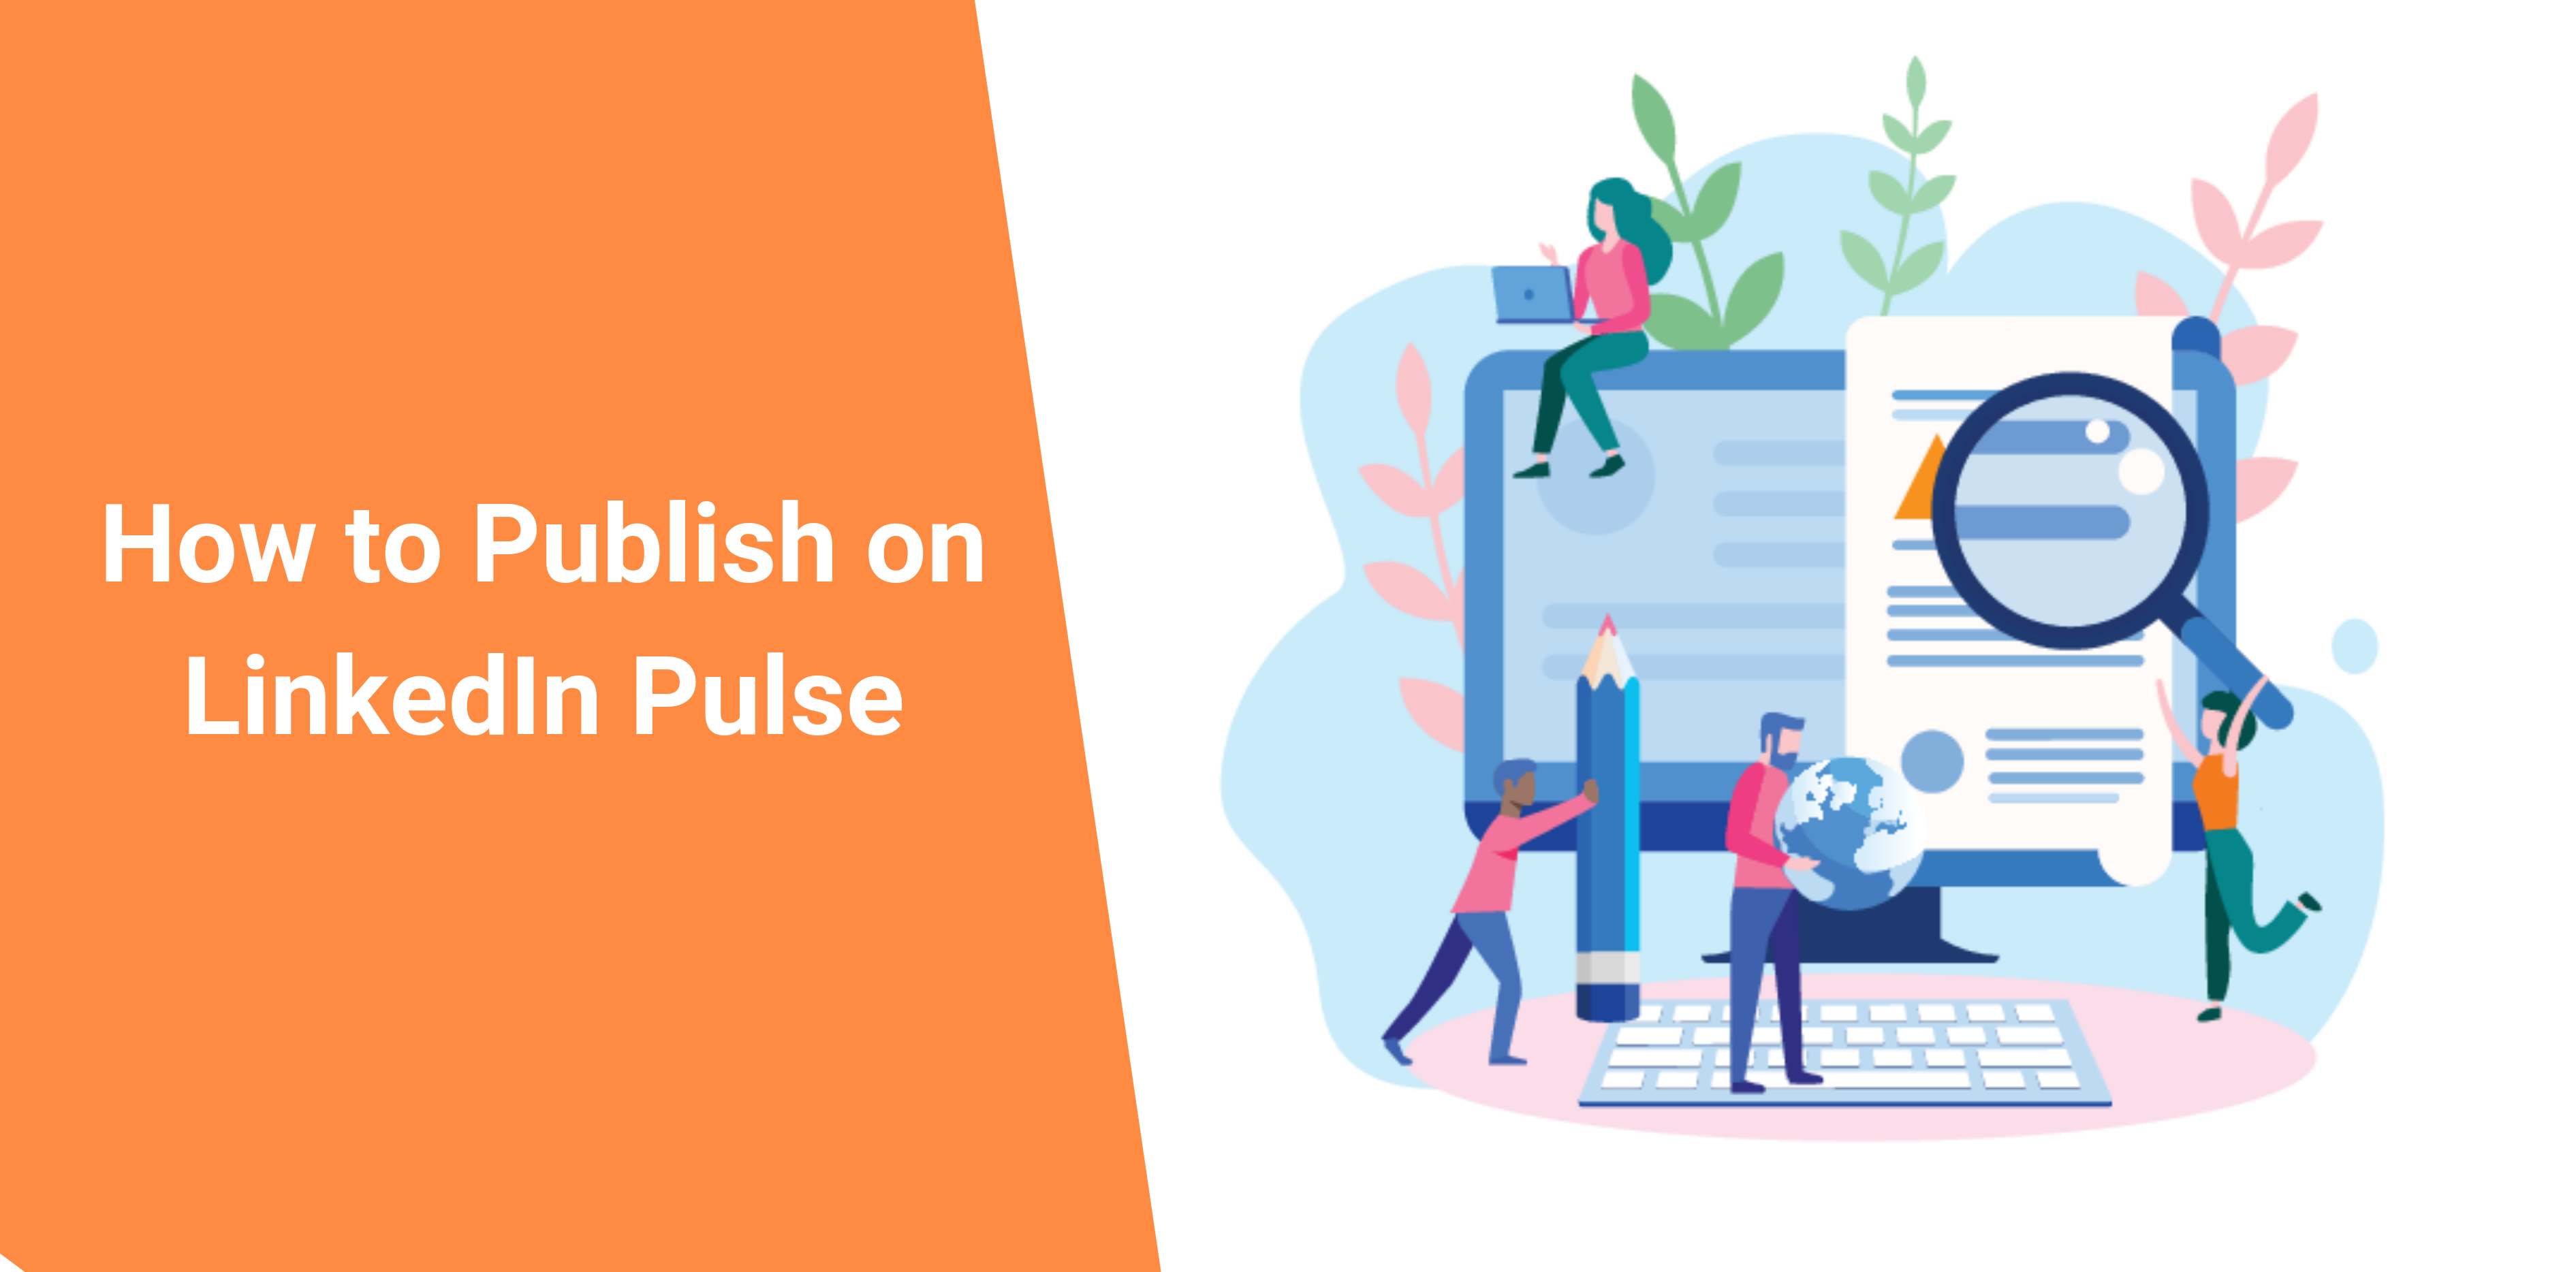 How to Publish on LinkedIn Pulse